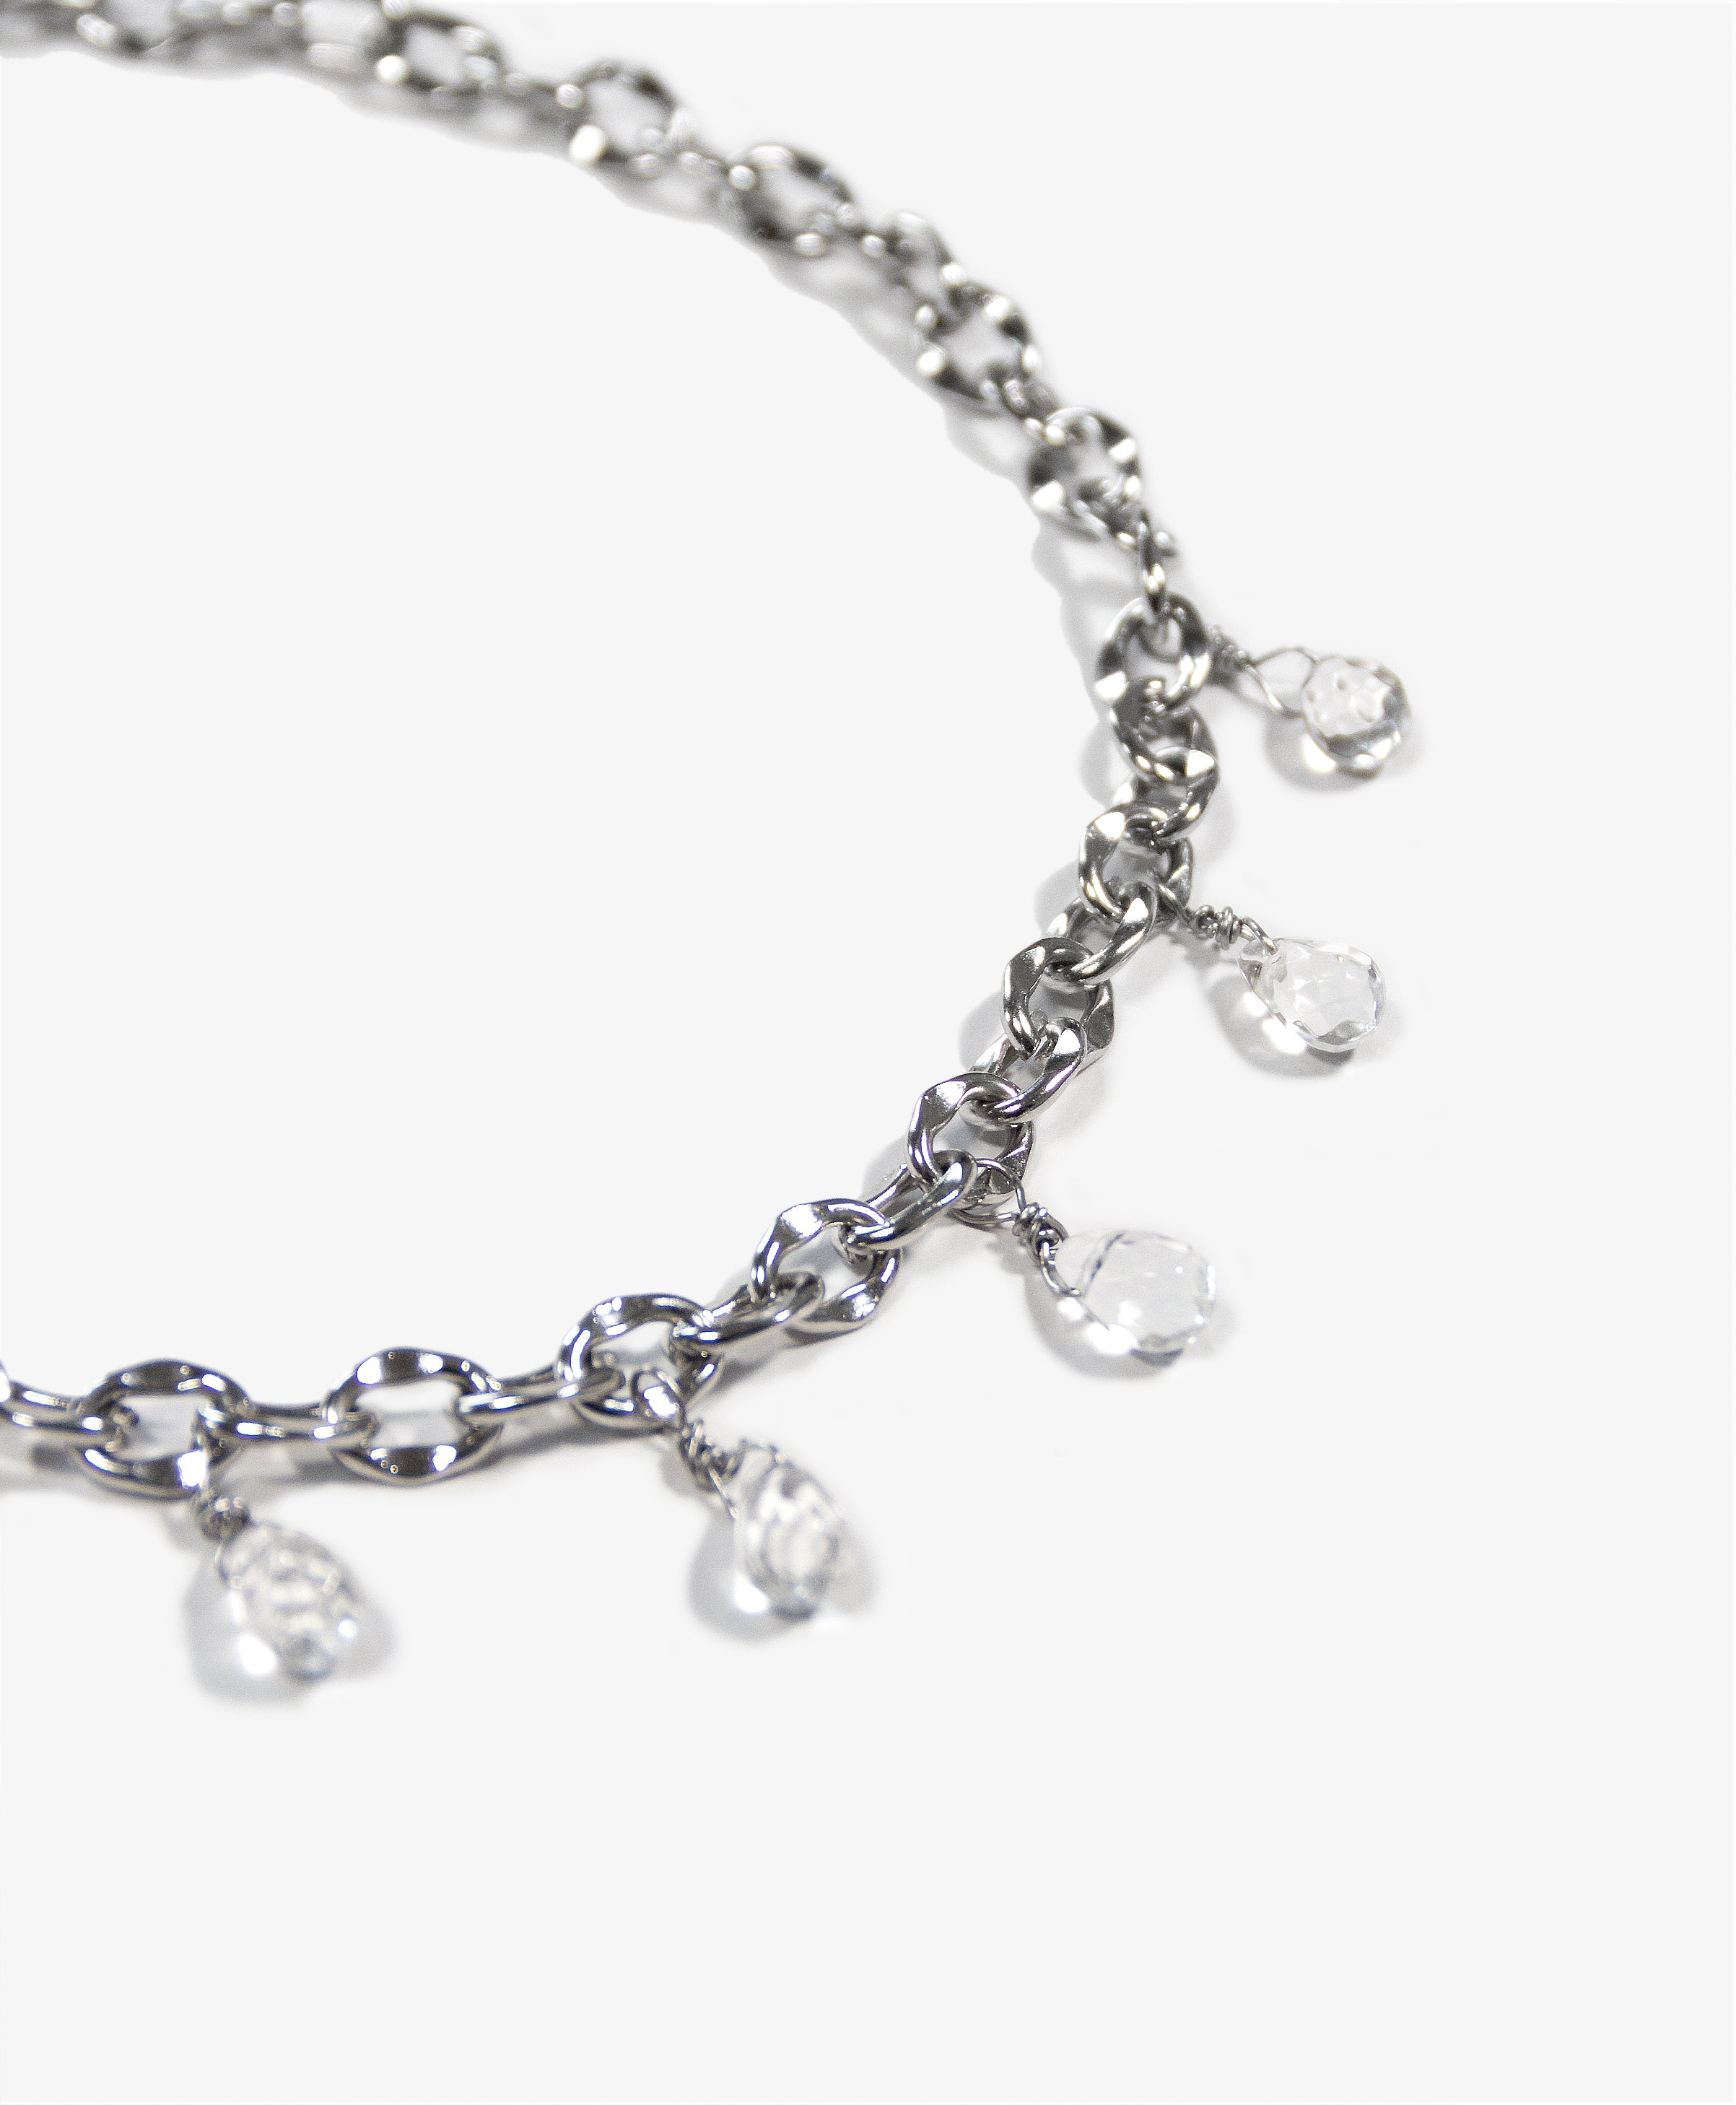 llayers-mens-women-jewelry-silver-stainlesssteel-choker-chain-necklace-unchained-009-quartz-Brooklyn-New-York-F2